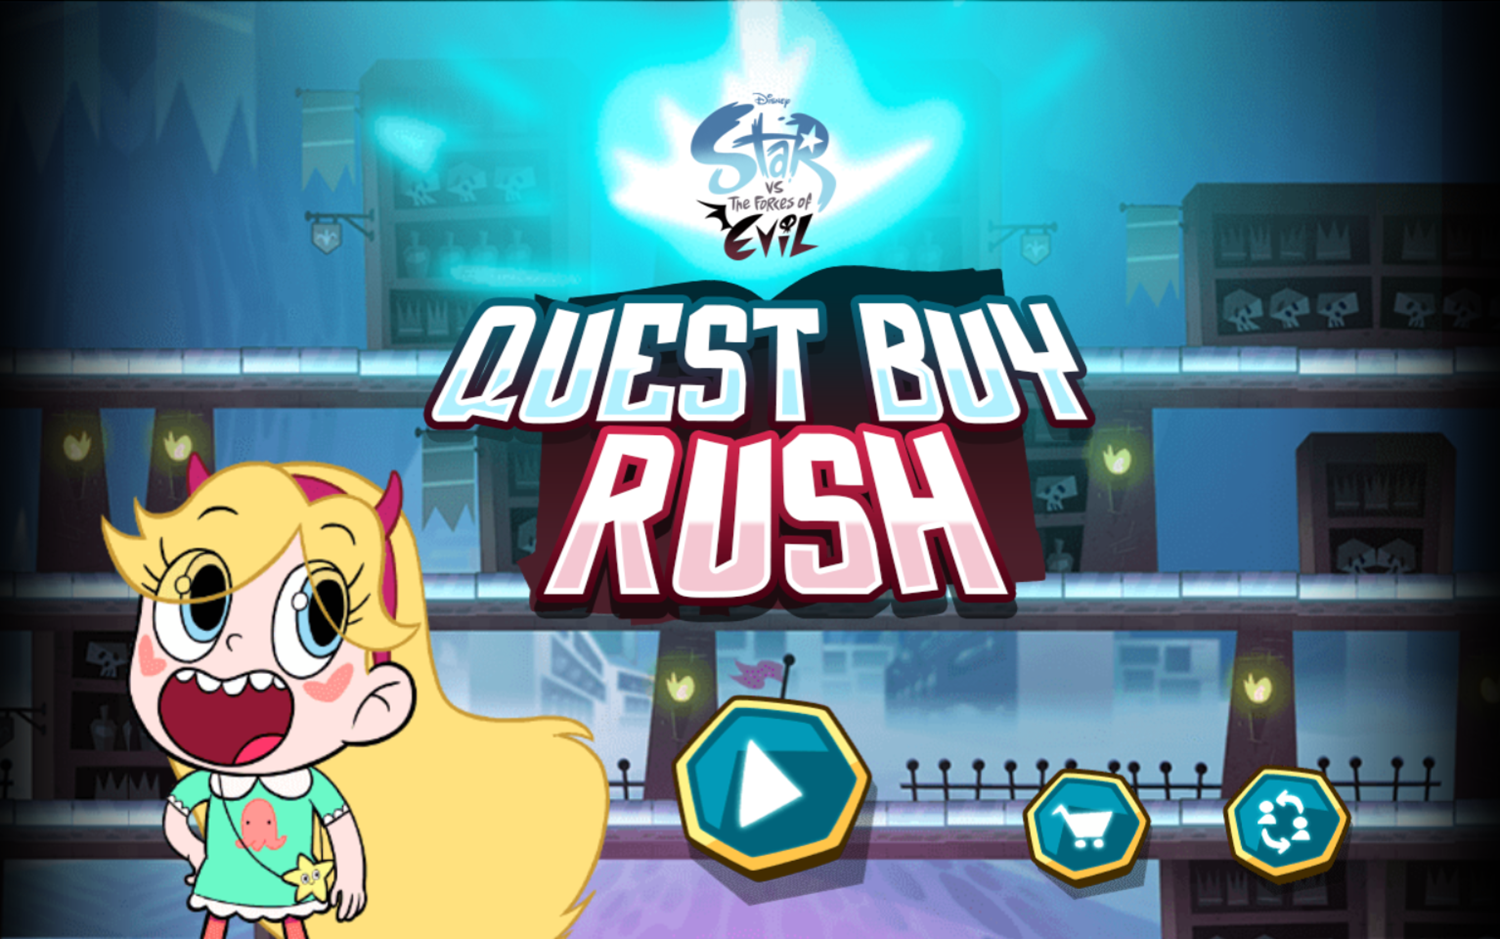 Star vs the Forces of Evil Quest Buy Rush Game Welcome Screen Screenshot.